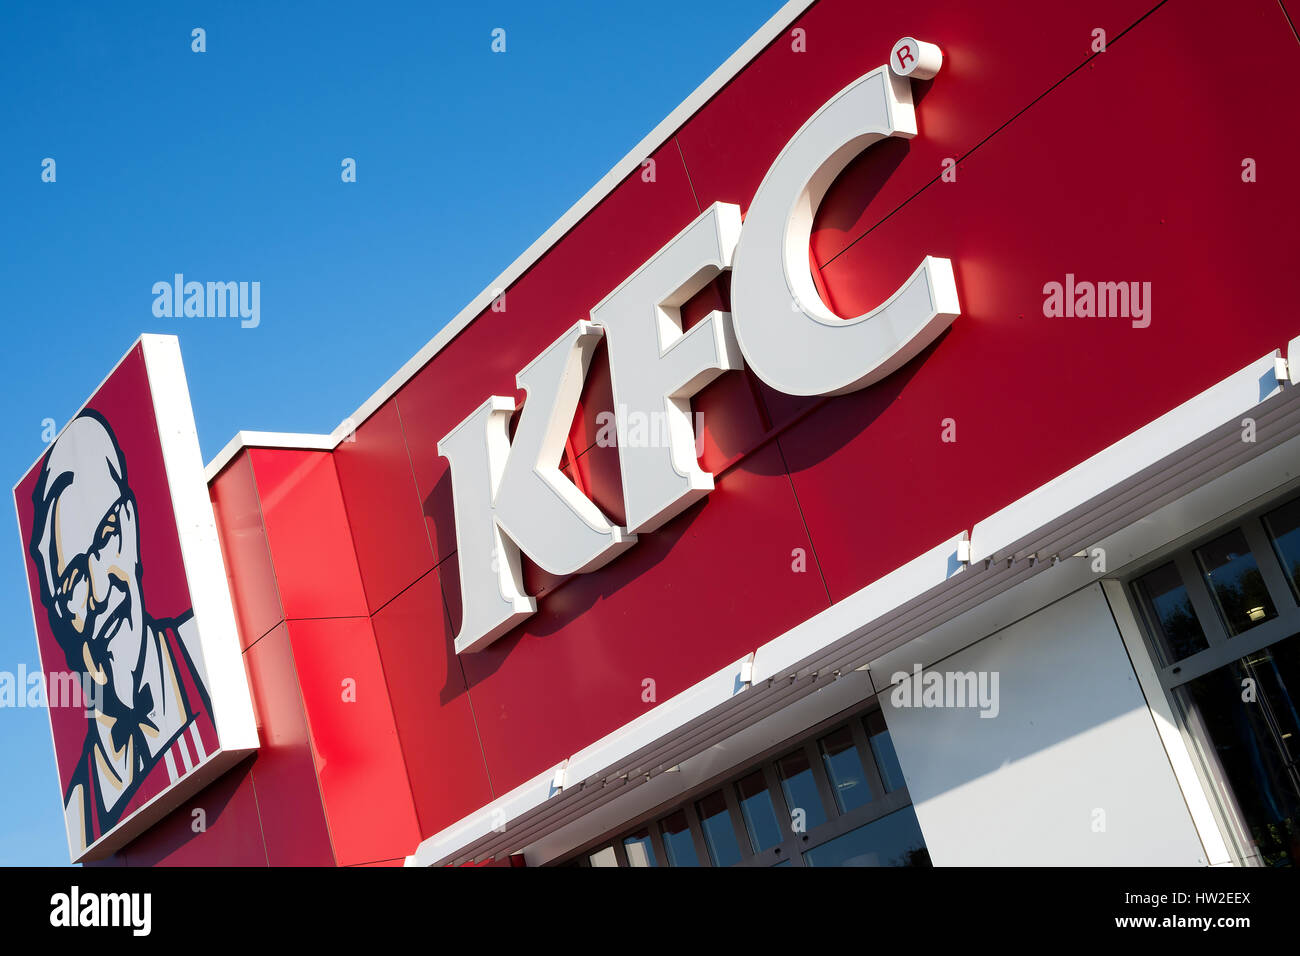 KFC fast food restaurant. Kentucky Fried Chicken (KFC) is the world's second largest restaurant chain with almost 20,000 locations globally. Stock Photo